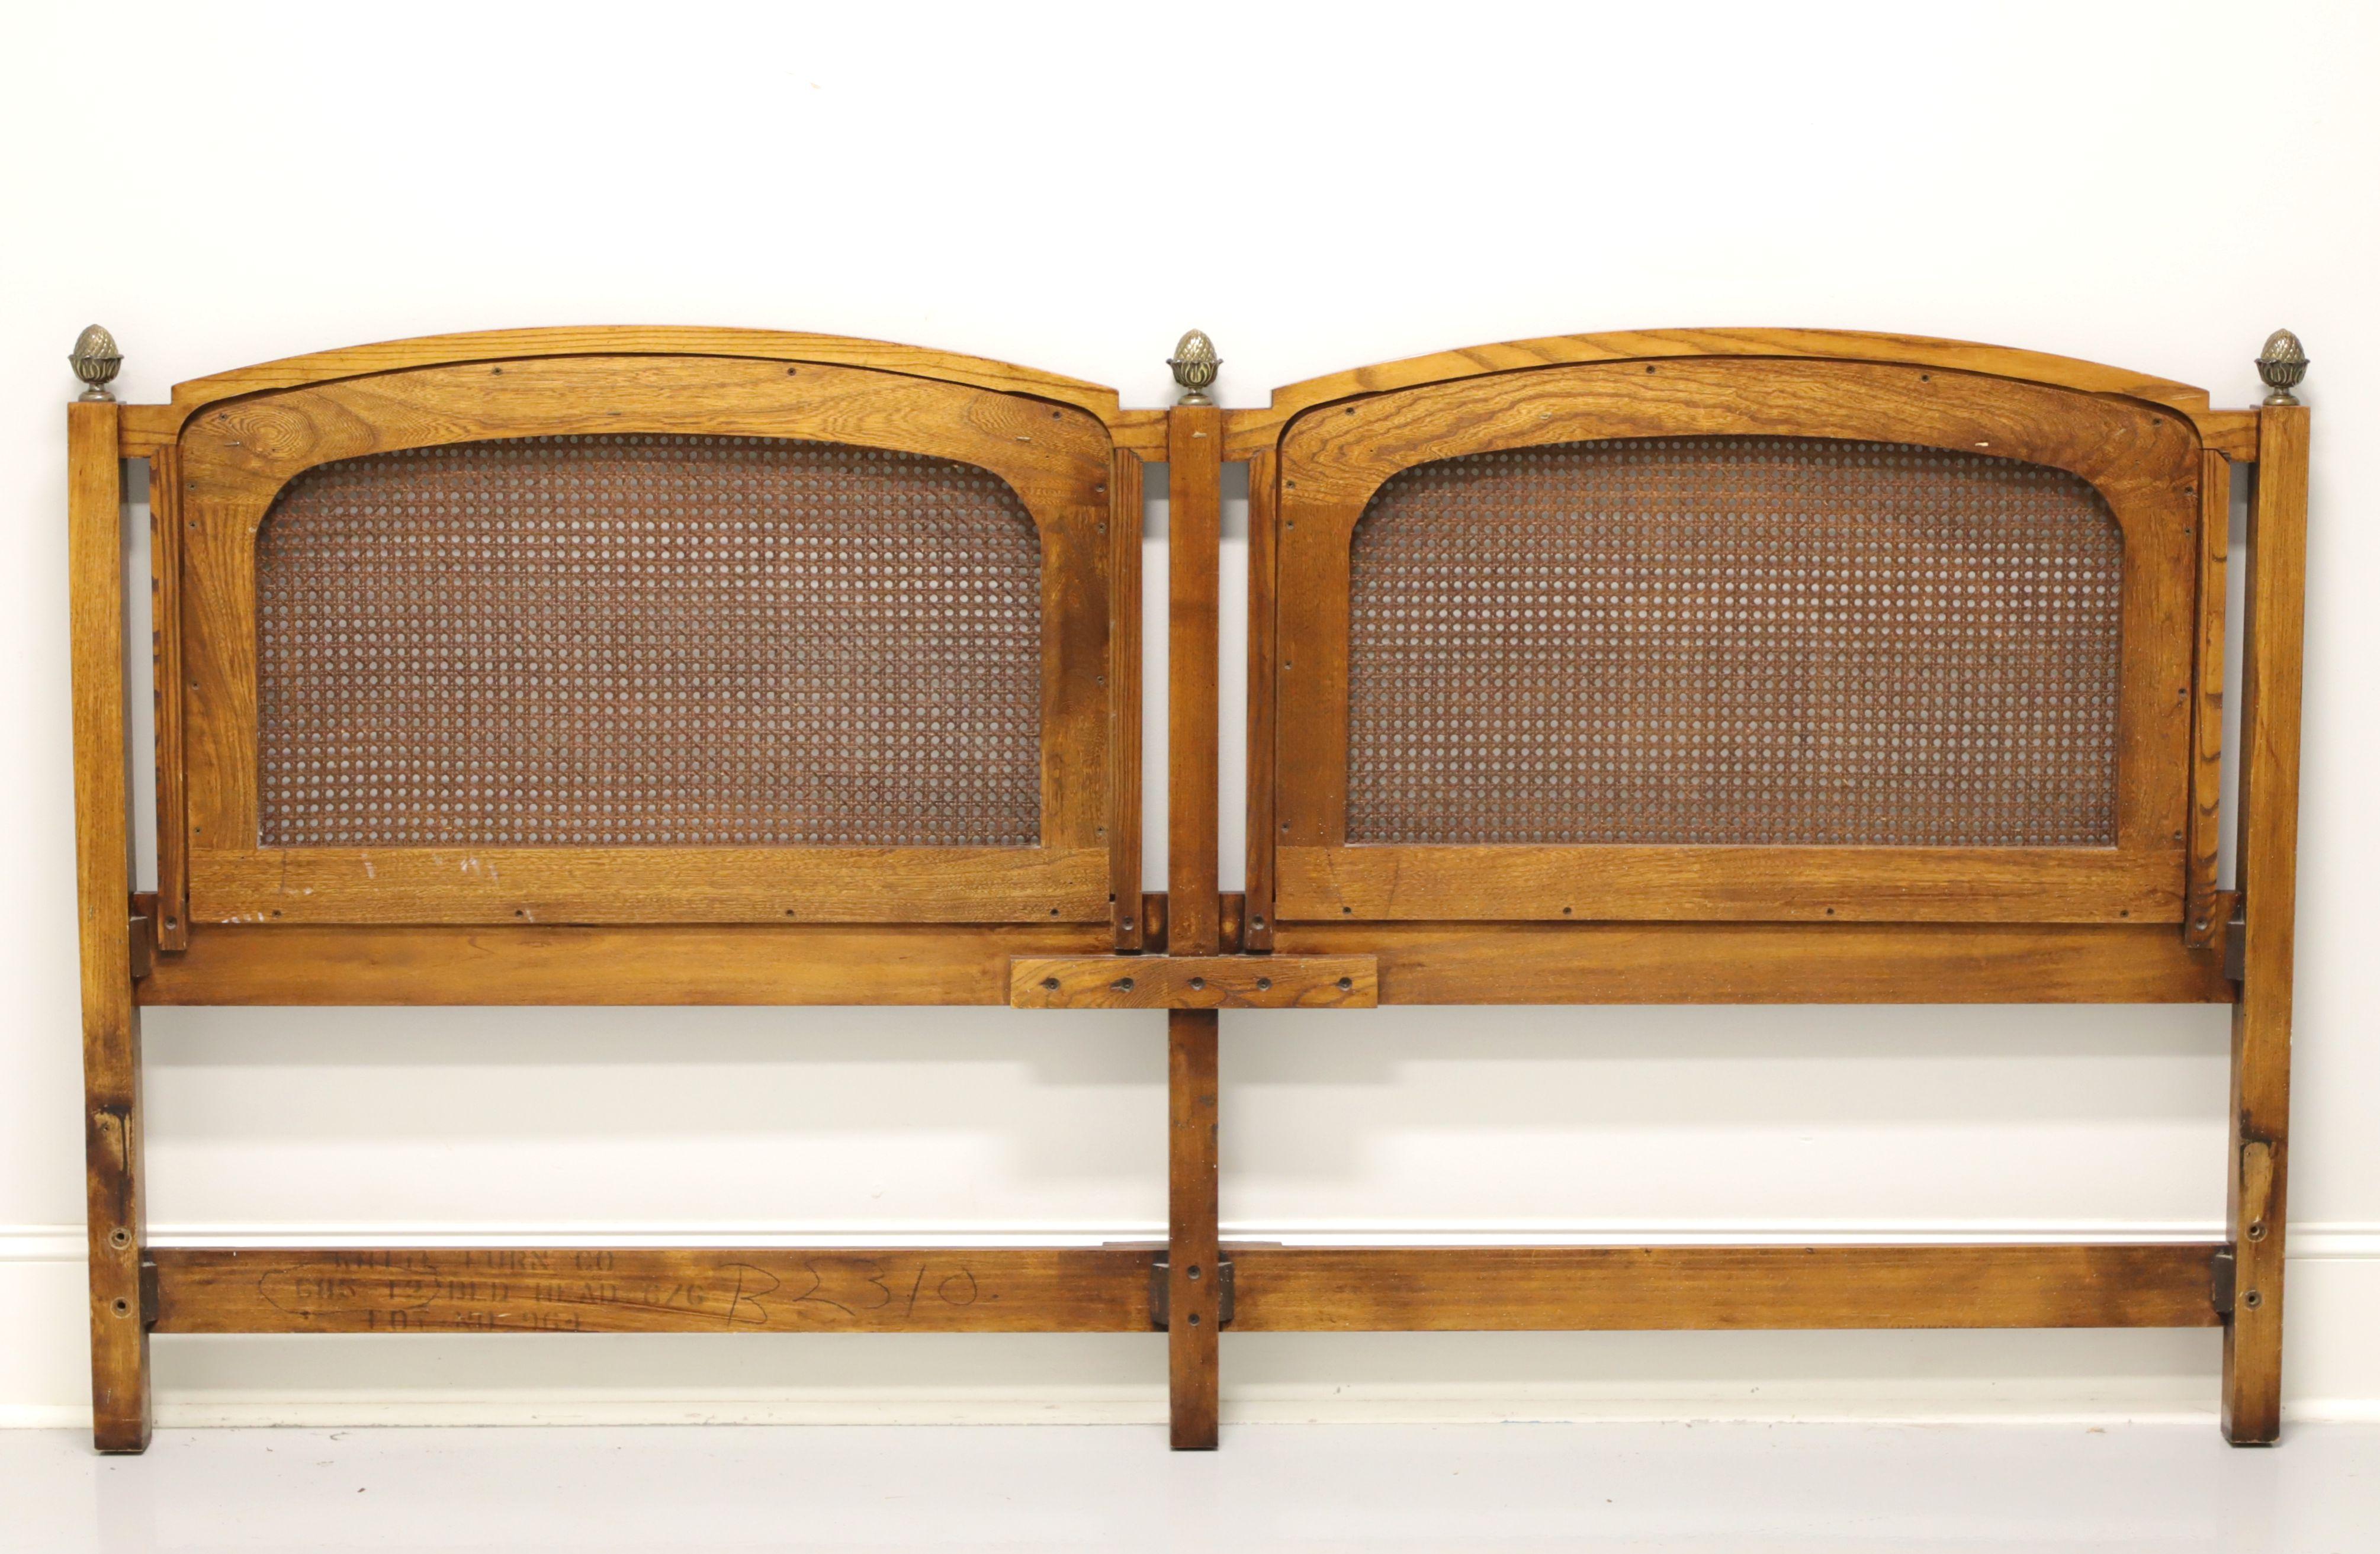 French Provincial Vintage Mid-20th Century King Size Caned Headboard by WHITE of Mebane